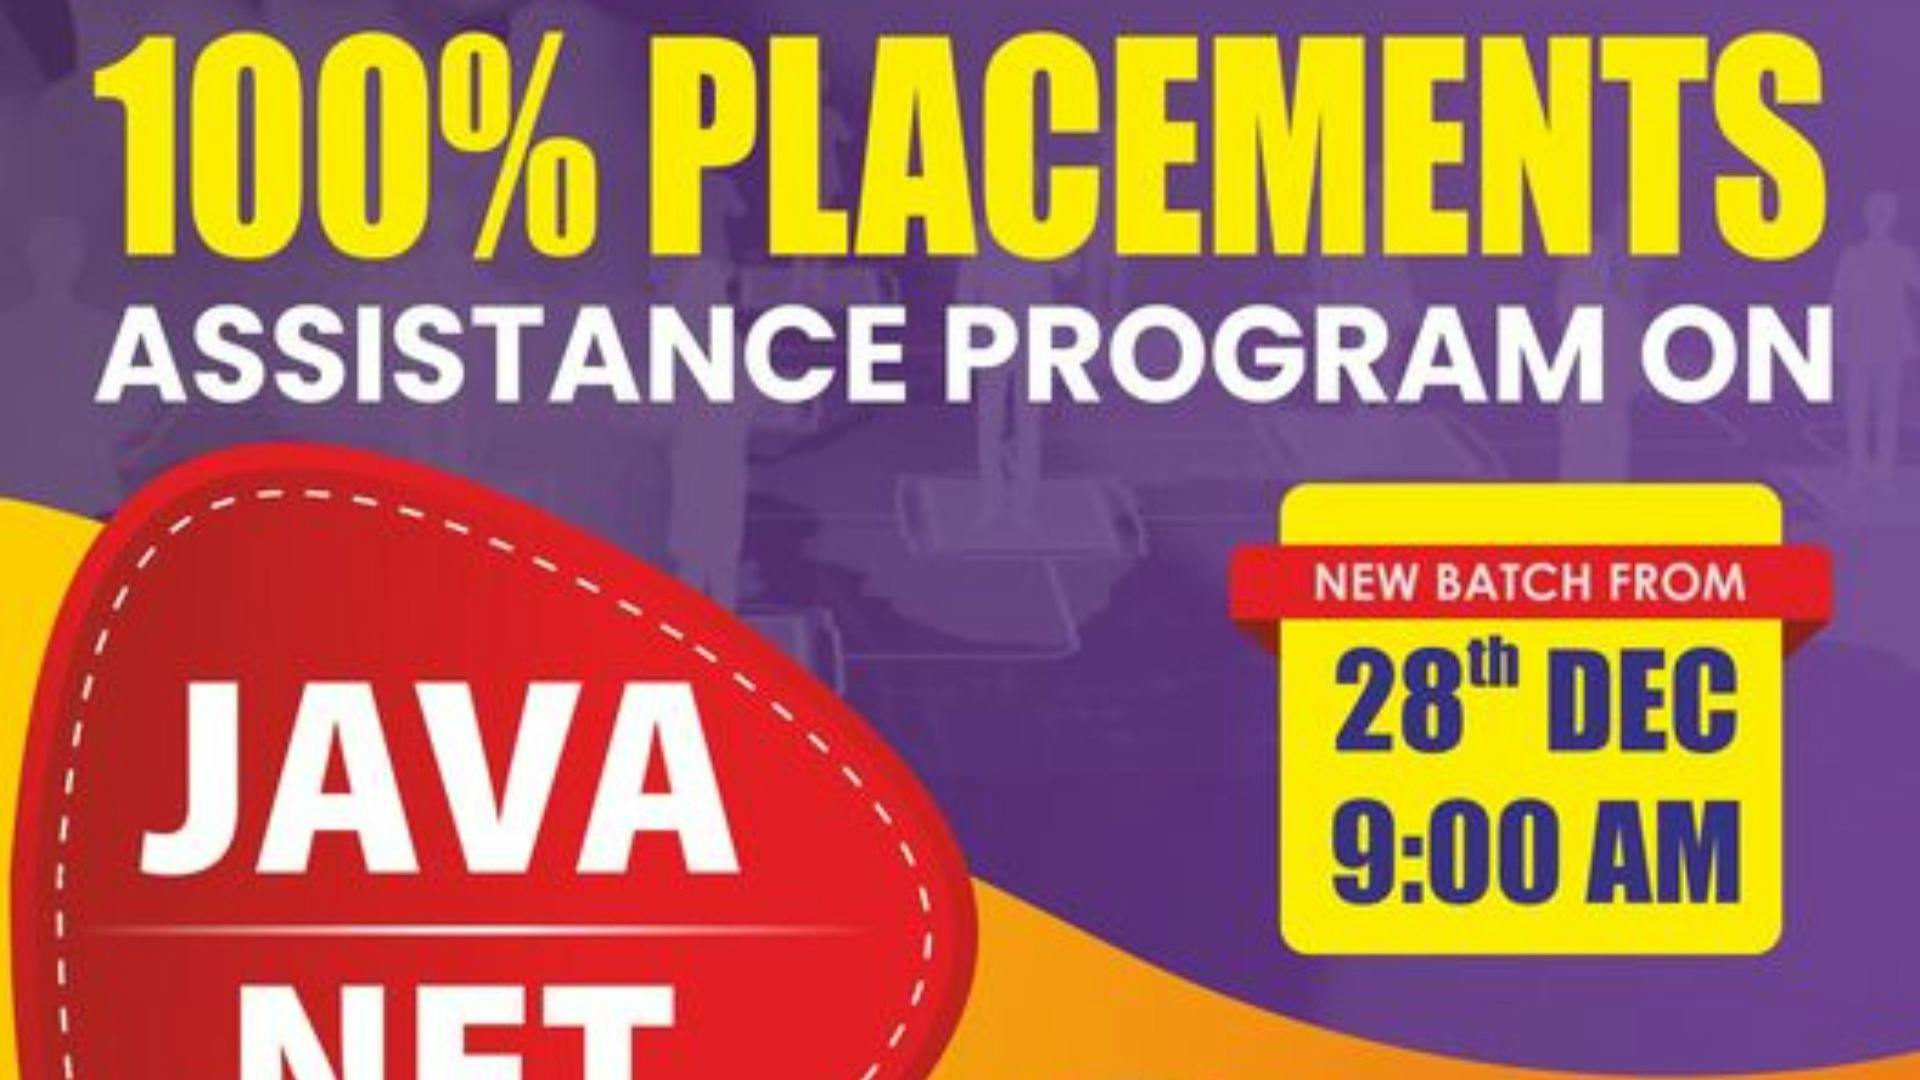 Best VLSI Courses | 100% Placement Assistance | Job Oriented Advanced VLSI  Courses | Reasonable Fees - YouTube